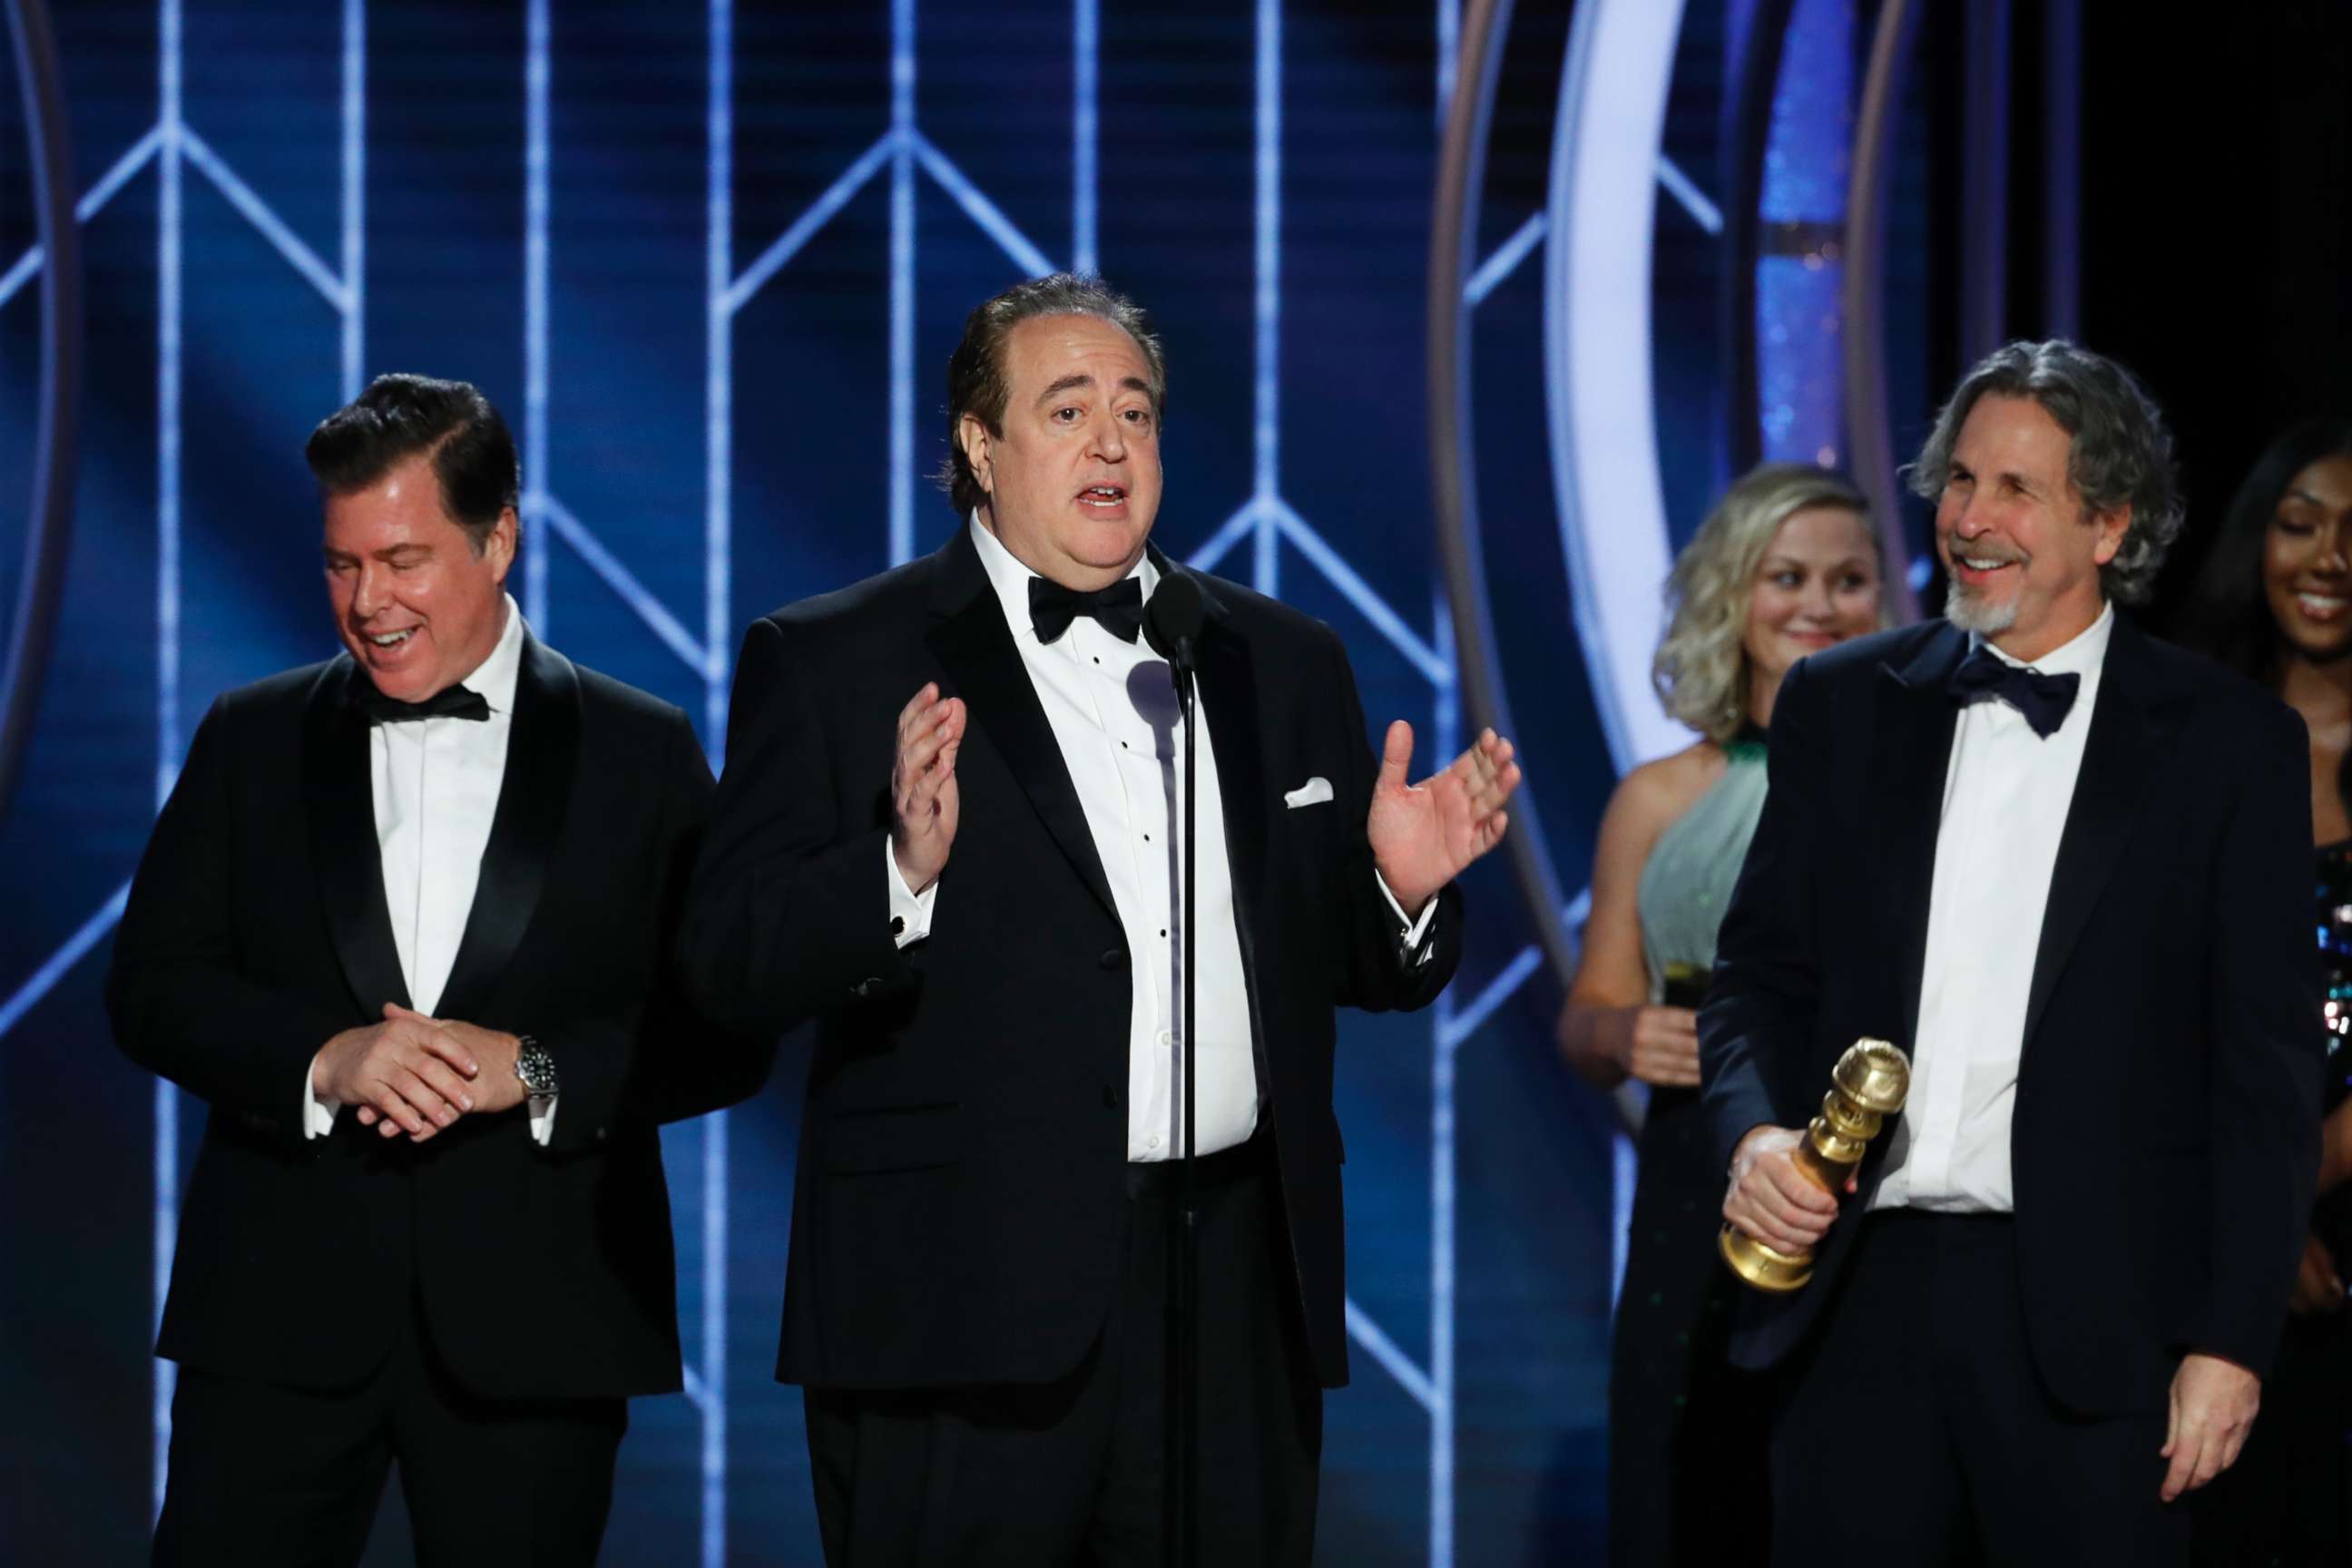 PHOTO: Nick Vallelonga accepts the award for best screenplay for "Green Book" during the 76th Annual Golden Globe Awards at the Beverly Hilton Hotel on Jan. 6, 2019, in Beverly Hills, Calif.